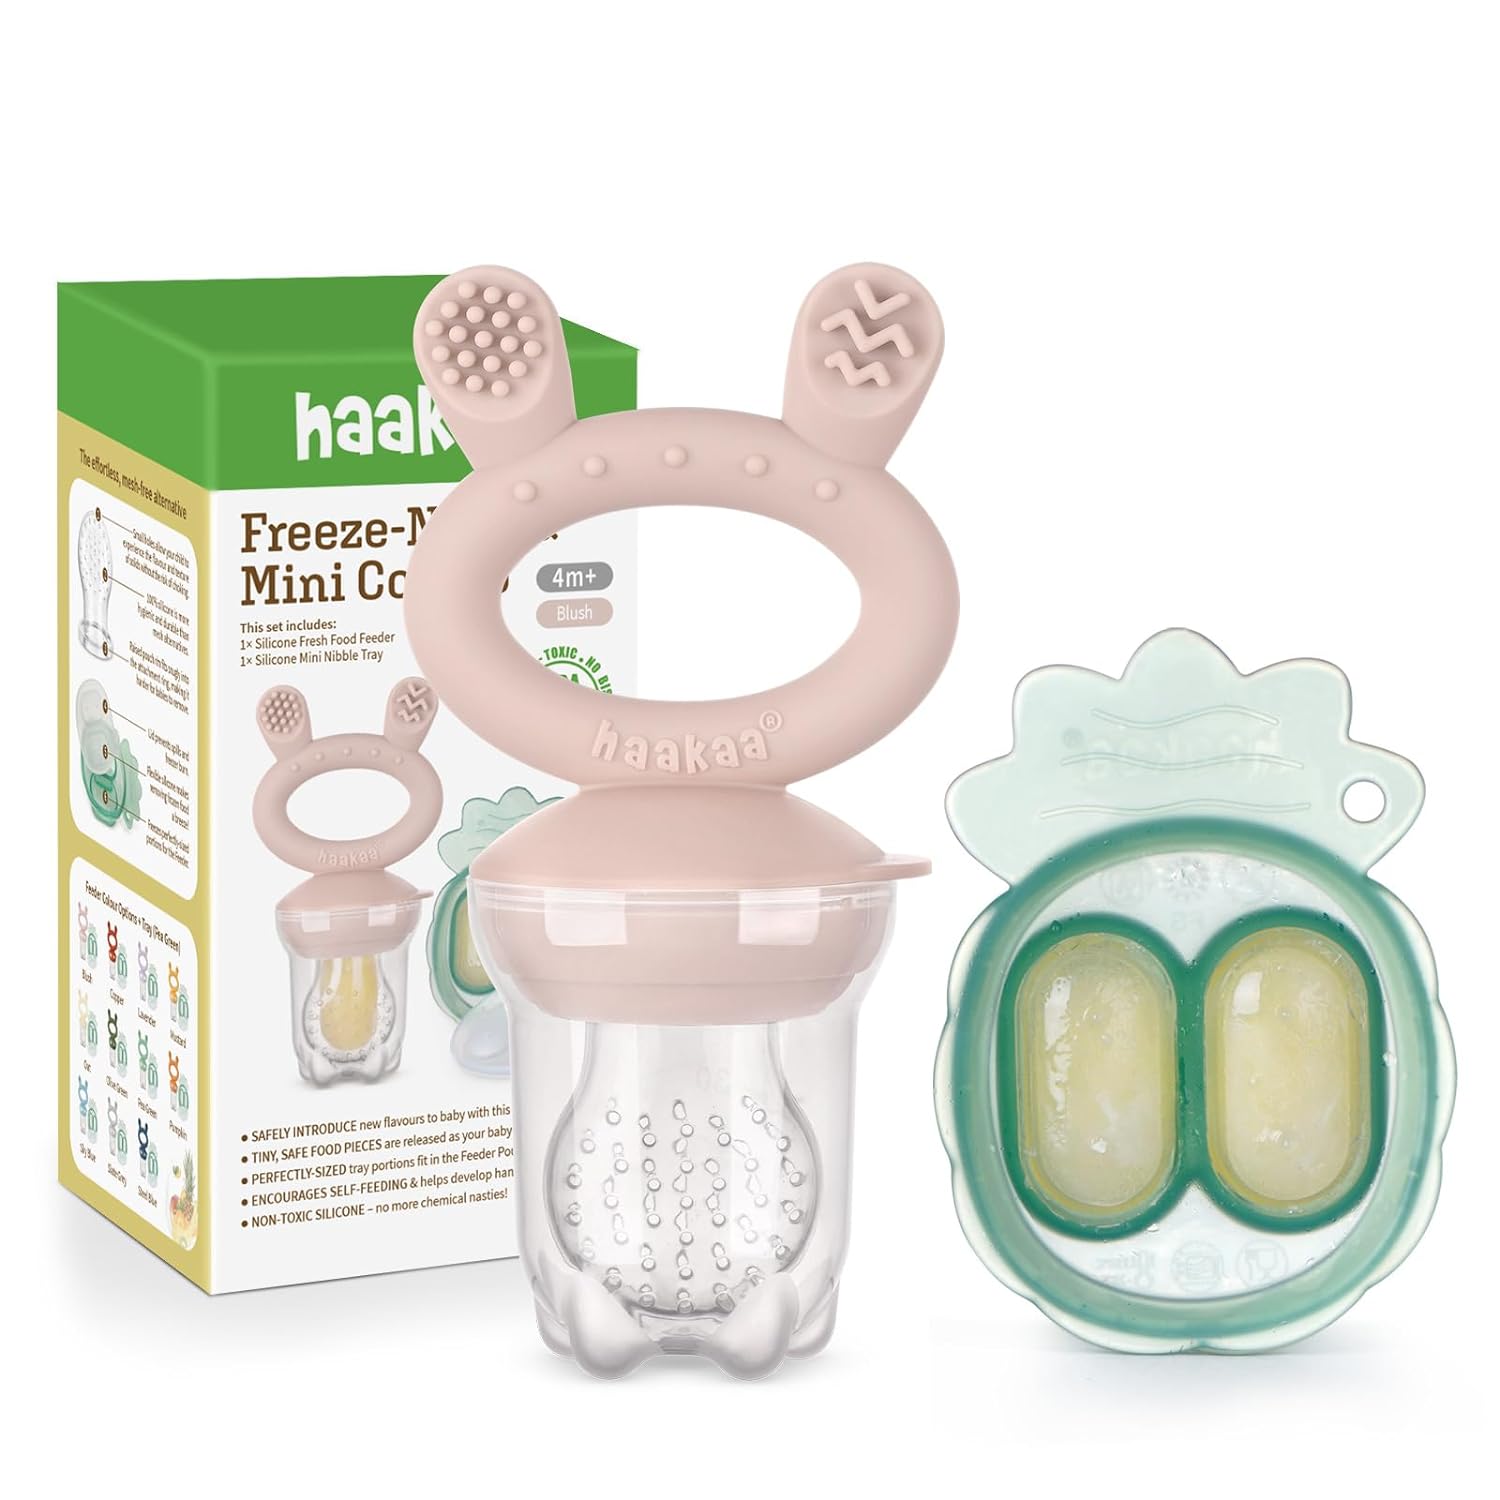 Haakaa Baby Fruit Food Feeder & Mini Freezer Nibble Tray Combo, Breastmilk Popsicle Molds for Baby Cooling Relief, BPA Free Silicone Feeder for Safe Infant Self Feeding, 4 Month+ (Blush)